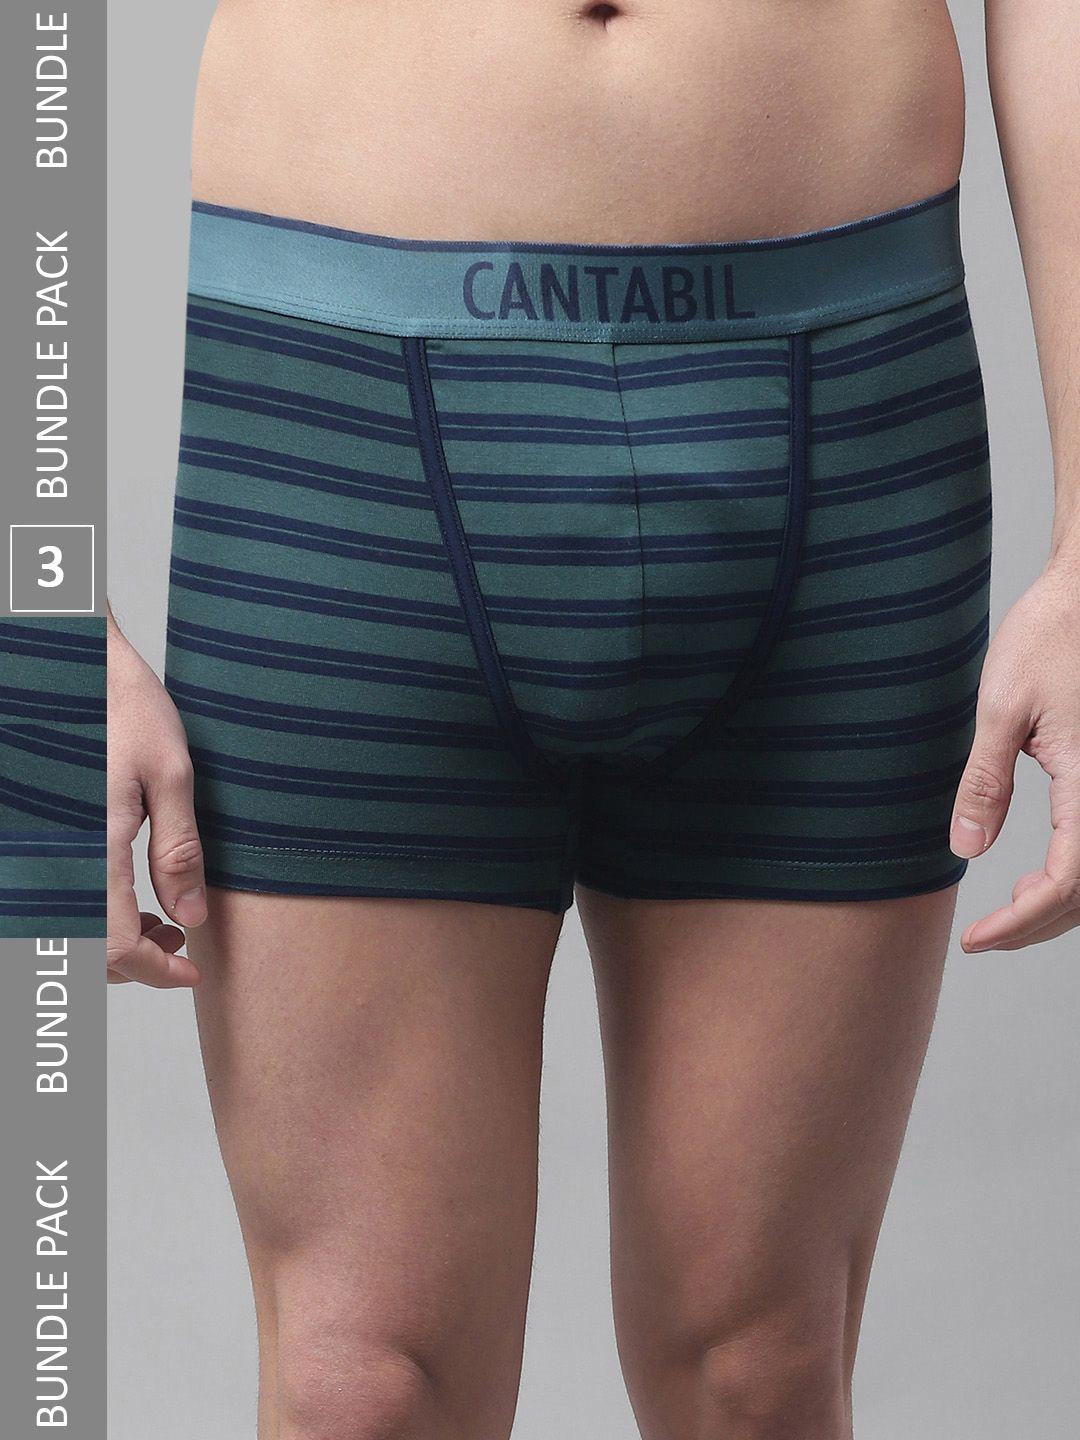 cantabil-men-pack-of-3-striped-boxer-briefs